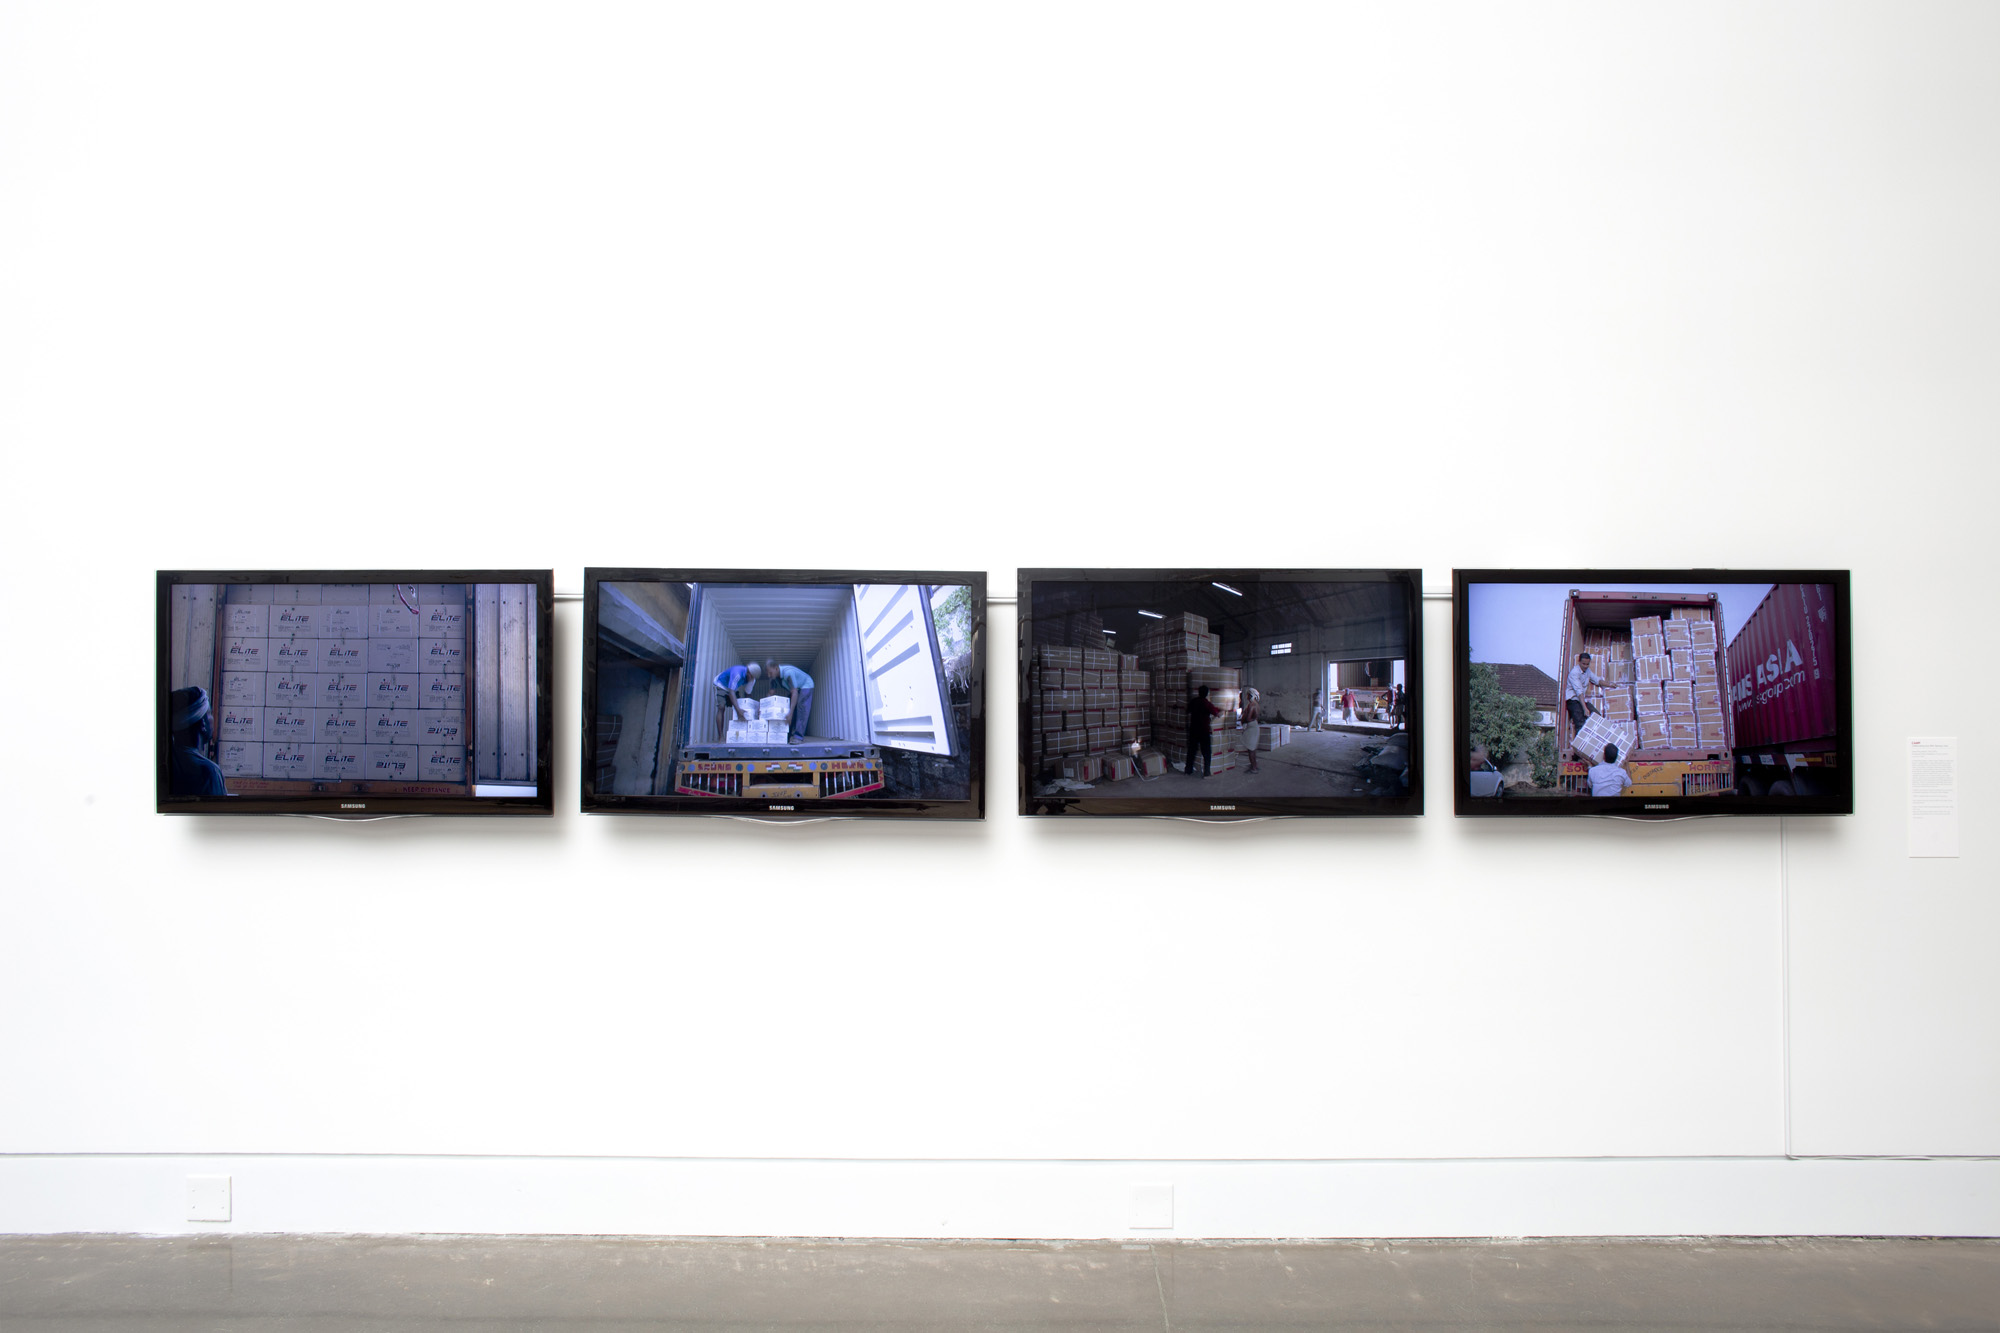 Four monitors installed in a row, on a white exhibition wall. The monitors are displaying scenes between a warehouse and a loading truck.